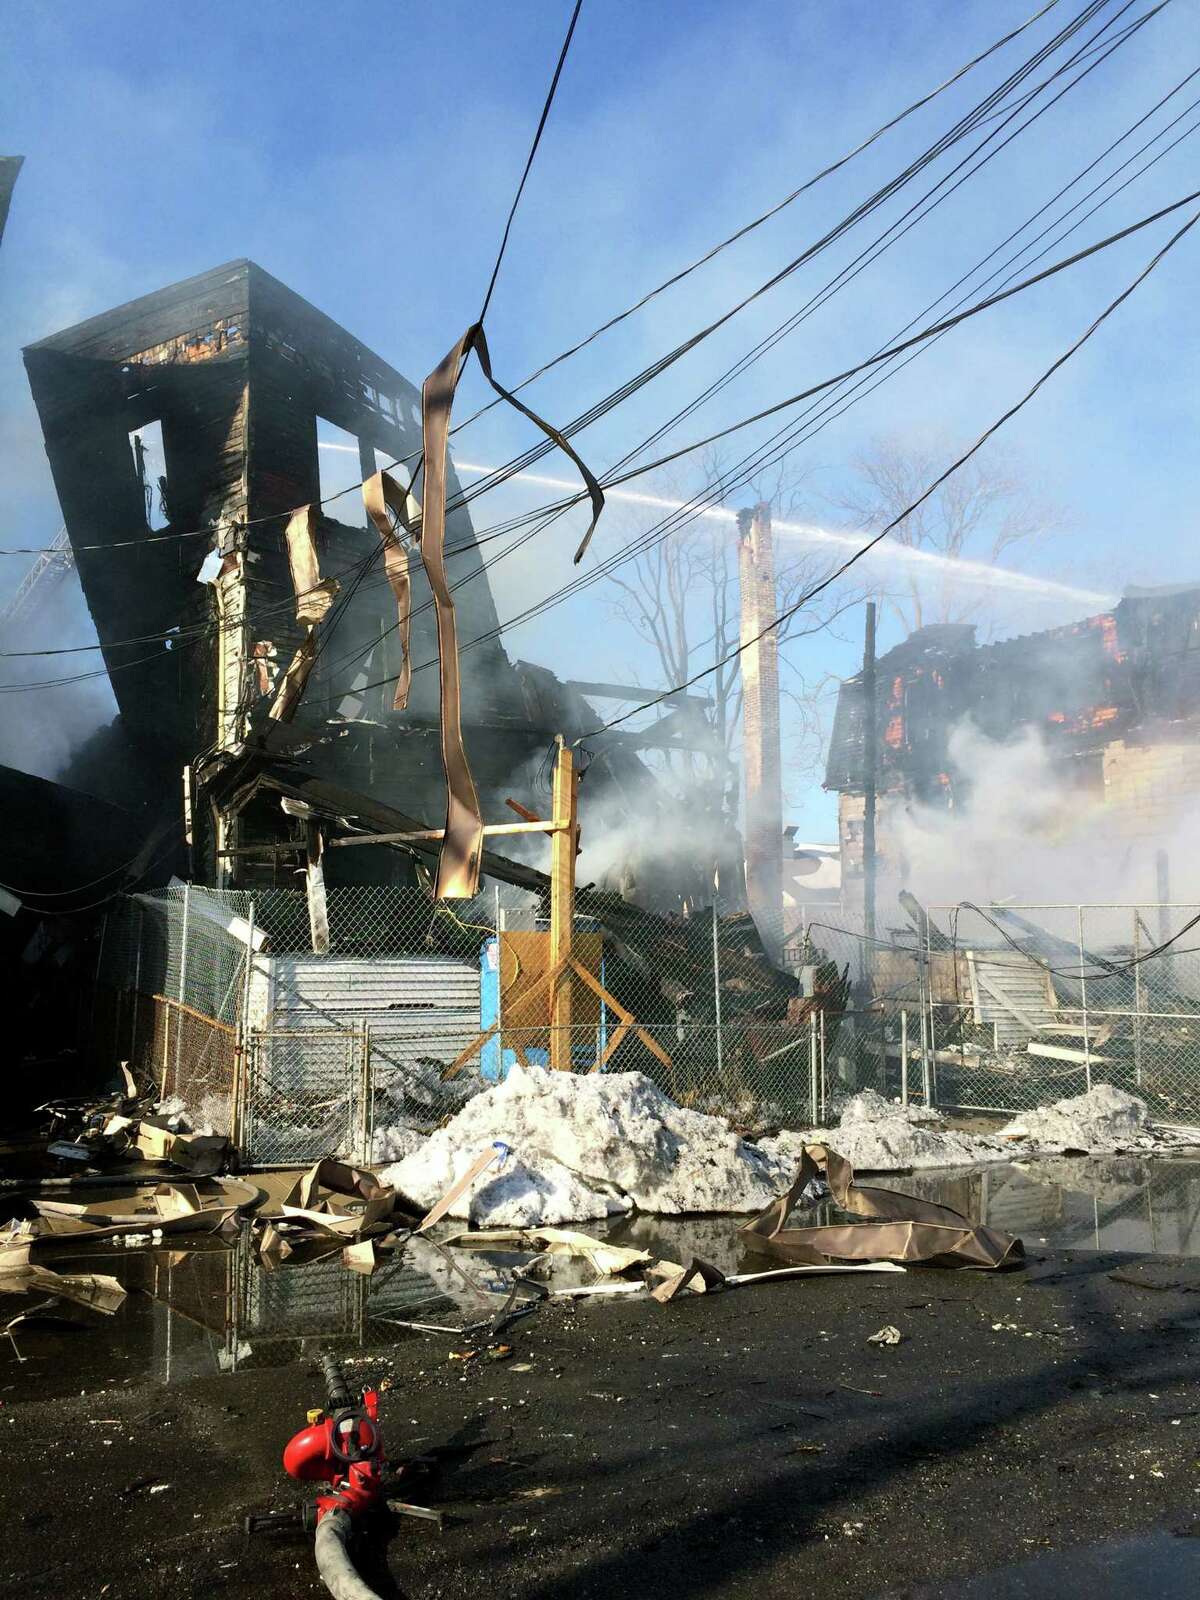 A raging fire engulfed four buildings on Hanover St. in Bridgeport's West Side shortly before 1 p.m. Friday Feb. 27, 2015. Two of the buildings were burned to the ground.